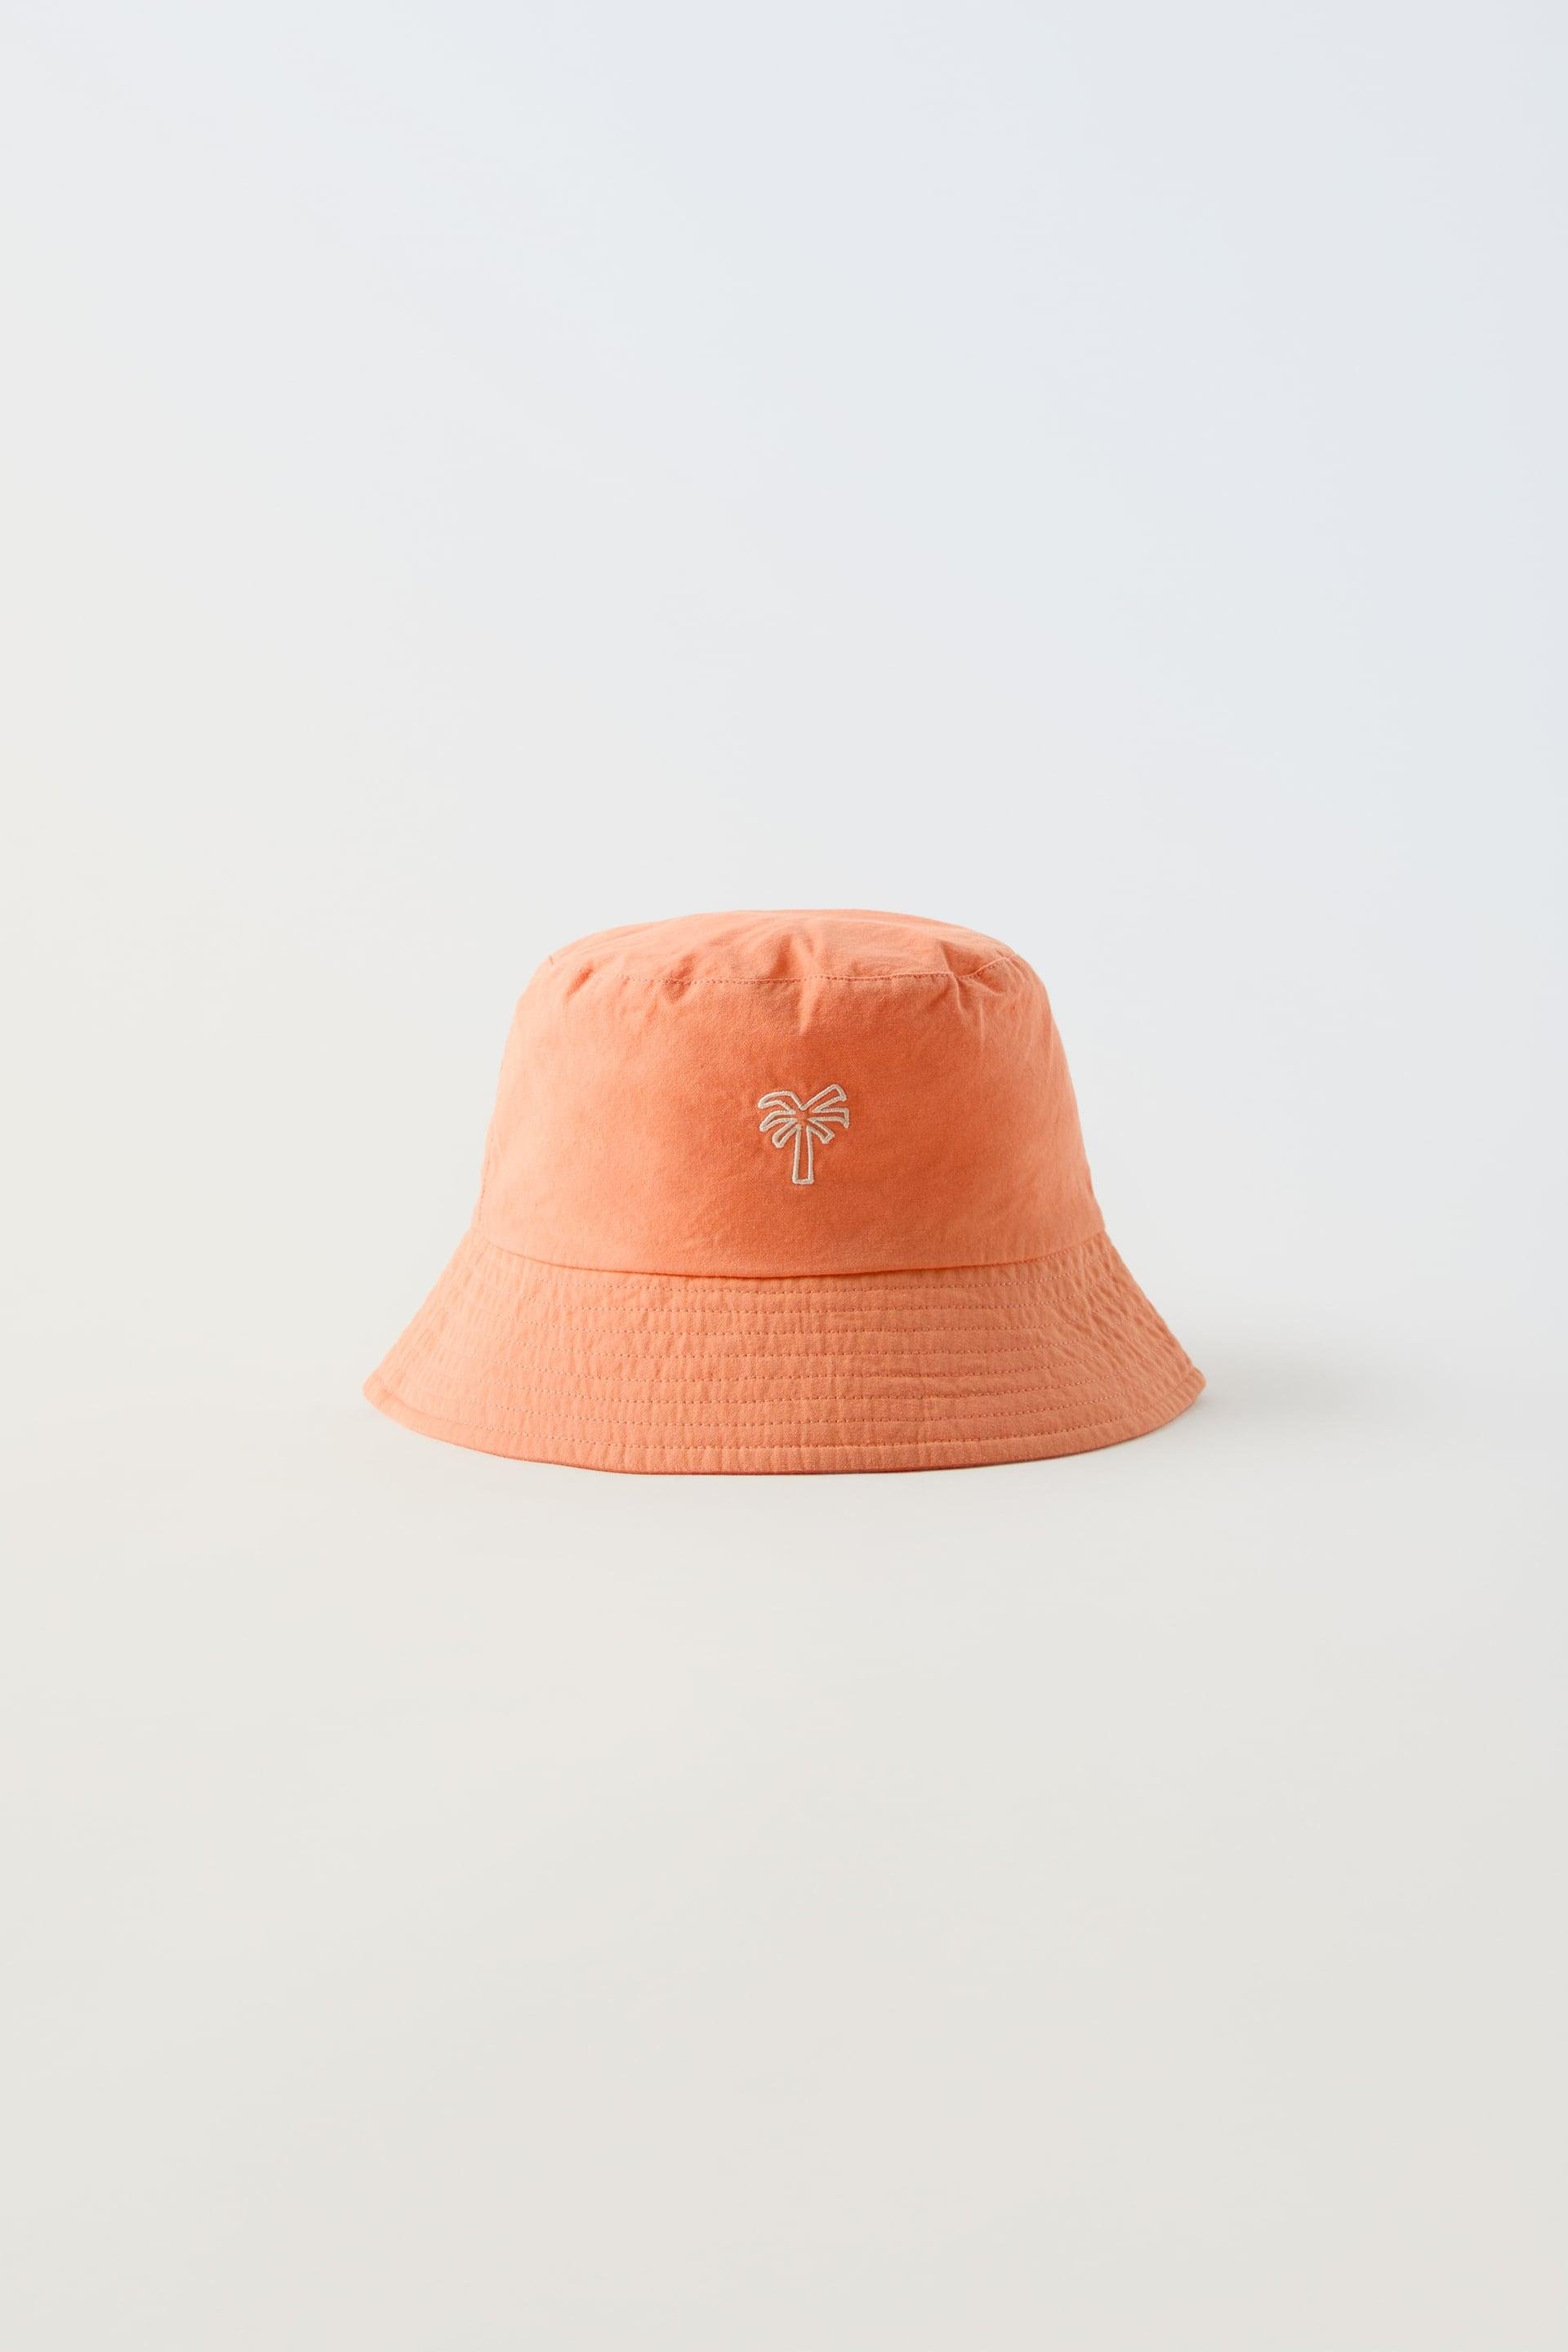 EMBROIDERED HAT by ZARA